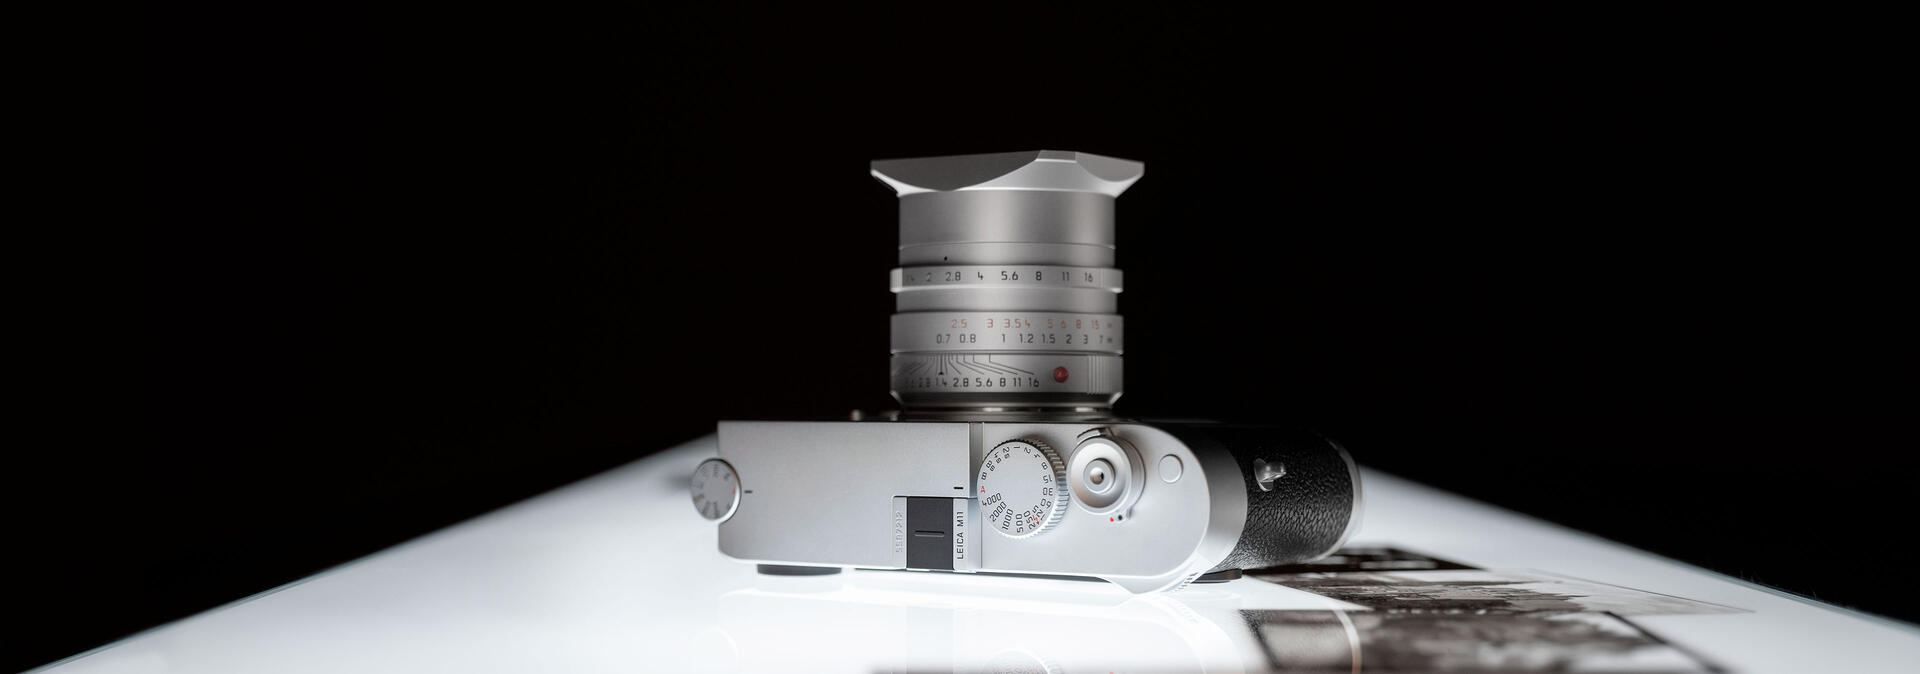 Leica M-System_Overview_Header